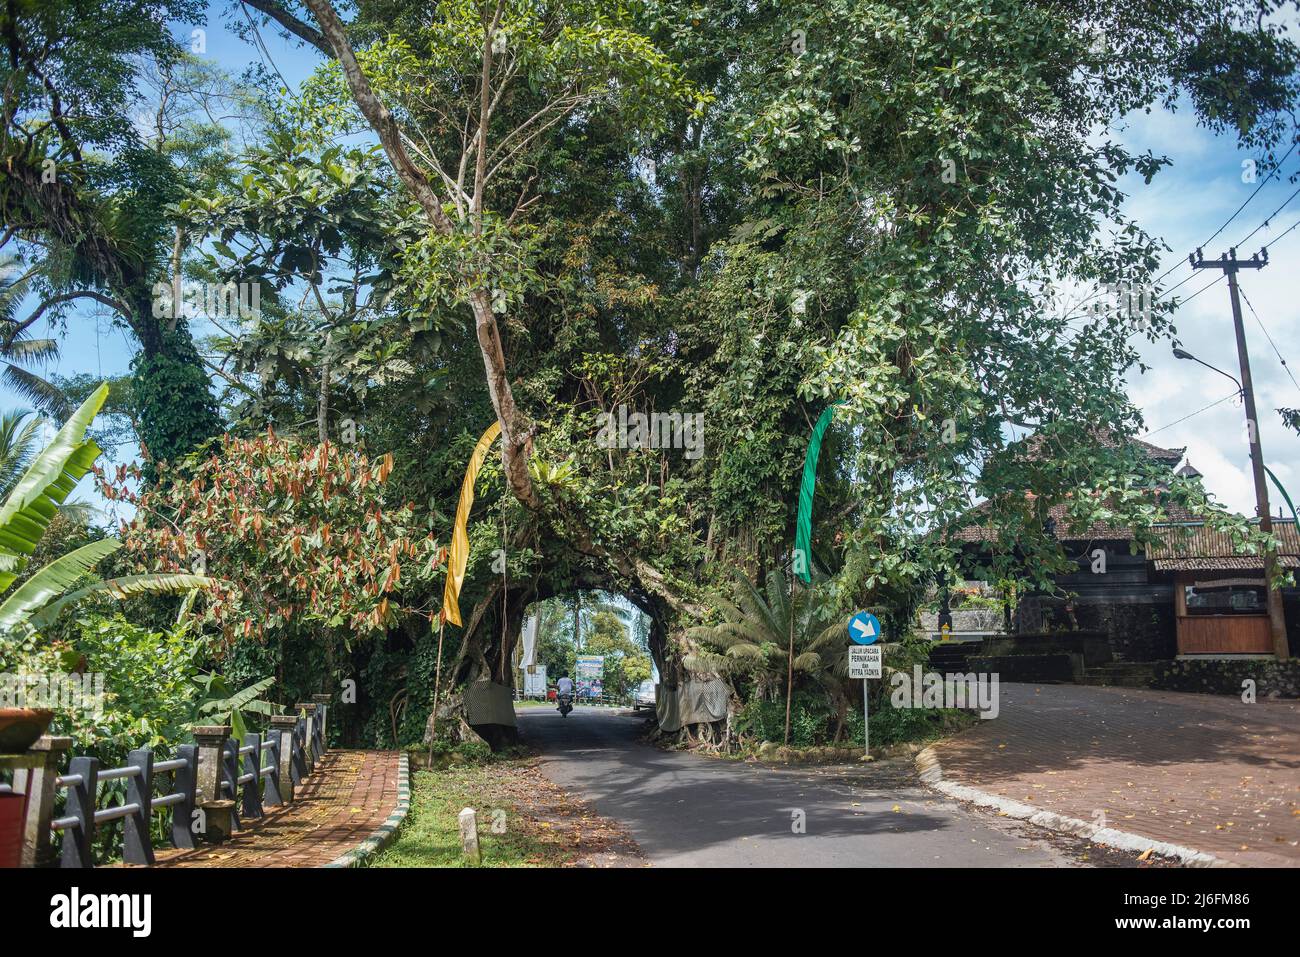 Bunut Bolong, the giant hollow banyan tree in the village of Manggisan, Jembrana Regency, Bali, Indonesia. The tree is a natural landmark thats sanctified by locals. Stock Photo